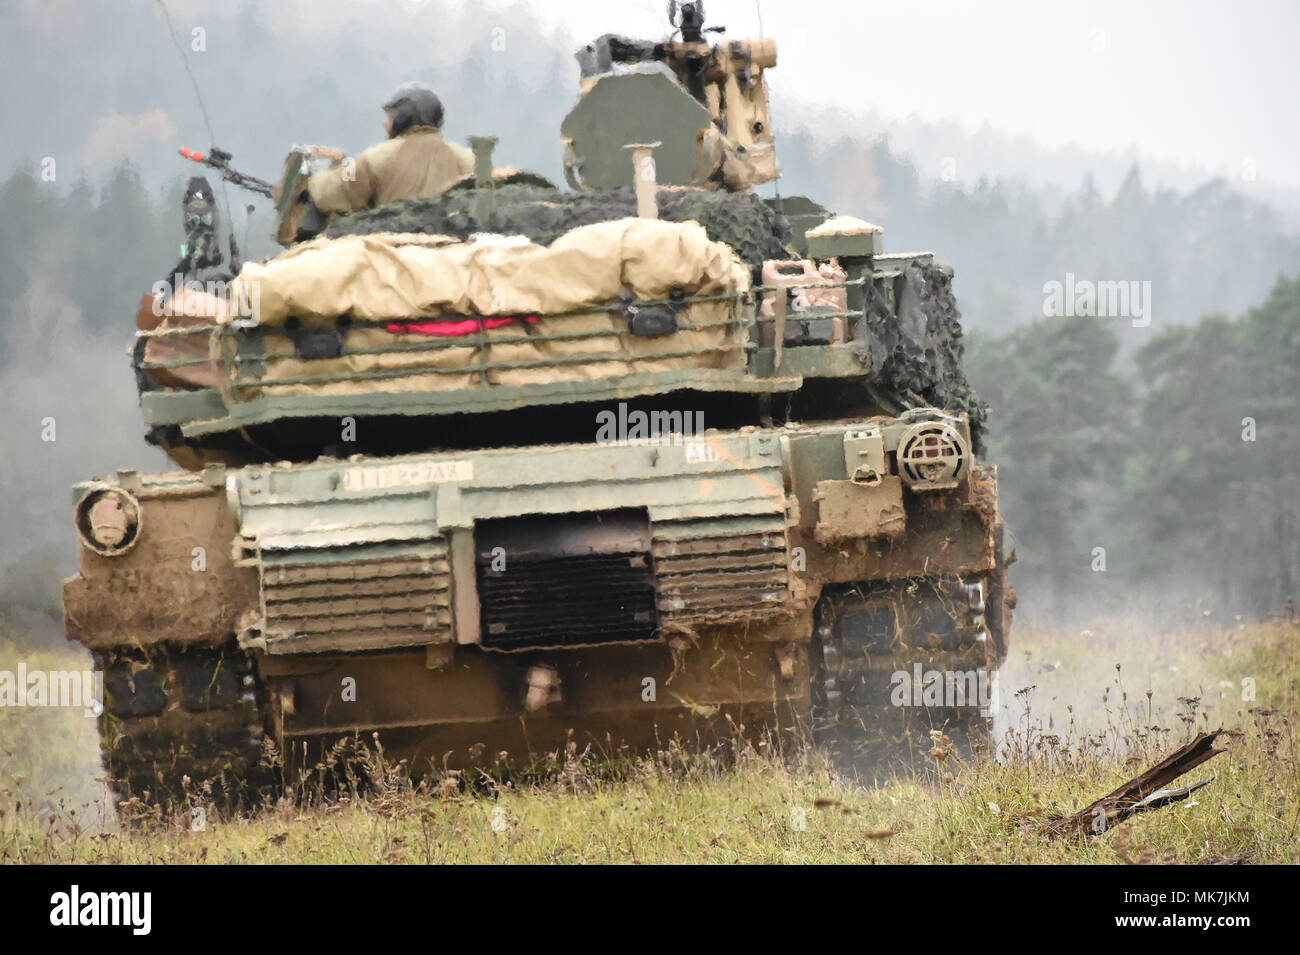 U.S. Soldiers with 2nd Armored Brigade Combat Team, 1st Infantry Division maneuver their M1A2 Abrams SEPv2 main battle tank during Exercise Allied Spirit VII at the 7th Army Training Command’s Hohenfels Training Area, Germany, Nov. 16, 2017. Approximately 4,050 service members from 13 nations are participating in the exercise from Oct. 30 to Nov. 22, 2017. Allied Spirit is a U.S. Army Europe-directed, 7ATC-conducted multinational exercise series designed to develop and enhance NATO and key partner’s interoperability and readiness. (U.S. Army photo by Gertrud Zach) Stock Photo